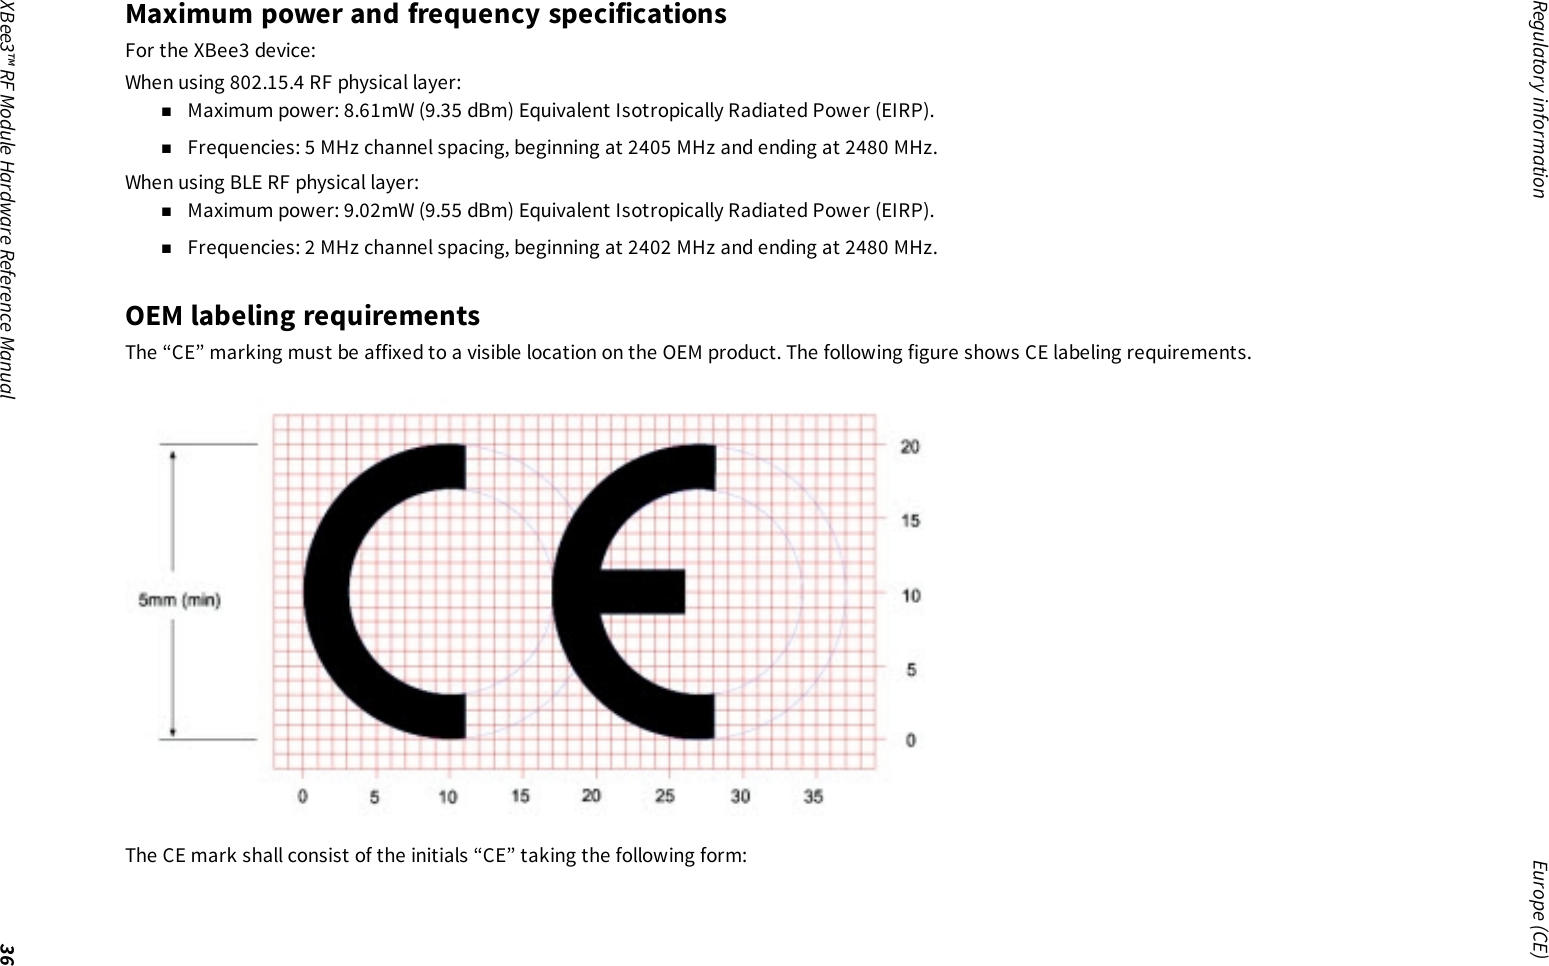 Regulatory information Europe (CE)XBee3™ RF Module Hardware Reference Manual 36Maximum power and frequency specificationsFor the XBee3 device:When using 802.15.4 RF physical layer:nMaximum power: 8.61mW (9.35 dBm) Equivalent Isotropically Radiated Power (EIRP).nFrequencies: 5 MHz channel spacing, beginning at 2405 MHz and ending at 2480 MHz.When using BLE RF physical layer:nMaximum power: 9.02mW (9.55 dBm) Equivalent Isotropically Radiated Power (EIRP).nFrequencies: 2 MHz channel spacing, beginning at 2402 MHz and ending at 2480 MHz.OEM labeling requirementsThe “CE” marking must be affixed to a visible location on the OEM product. The following figure shows CE labeling requirements.The CE mark shall consist of the initials “CE” taking the following form: